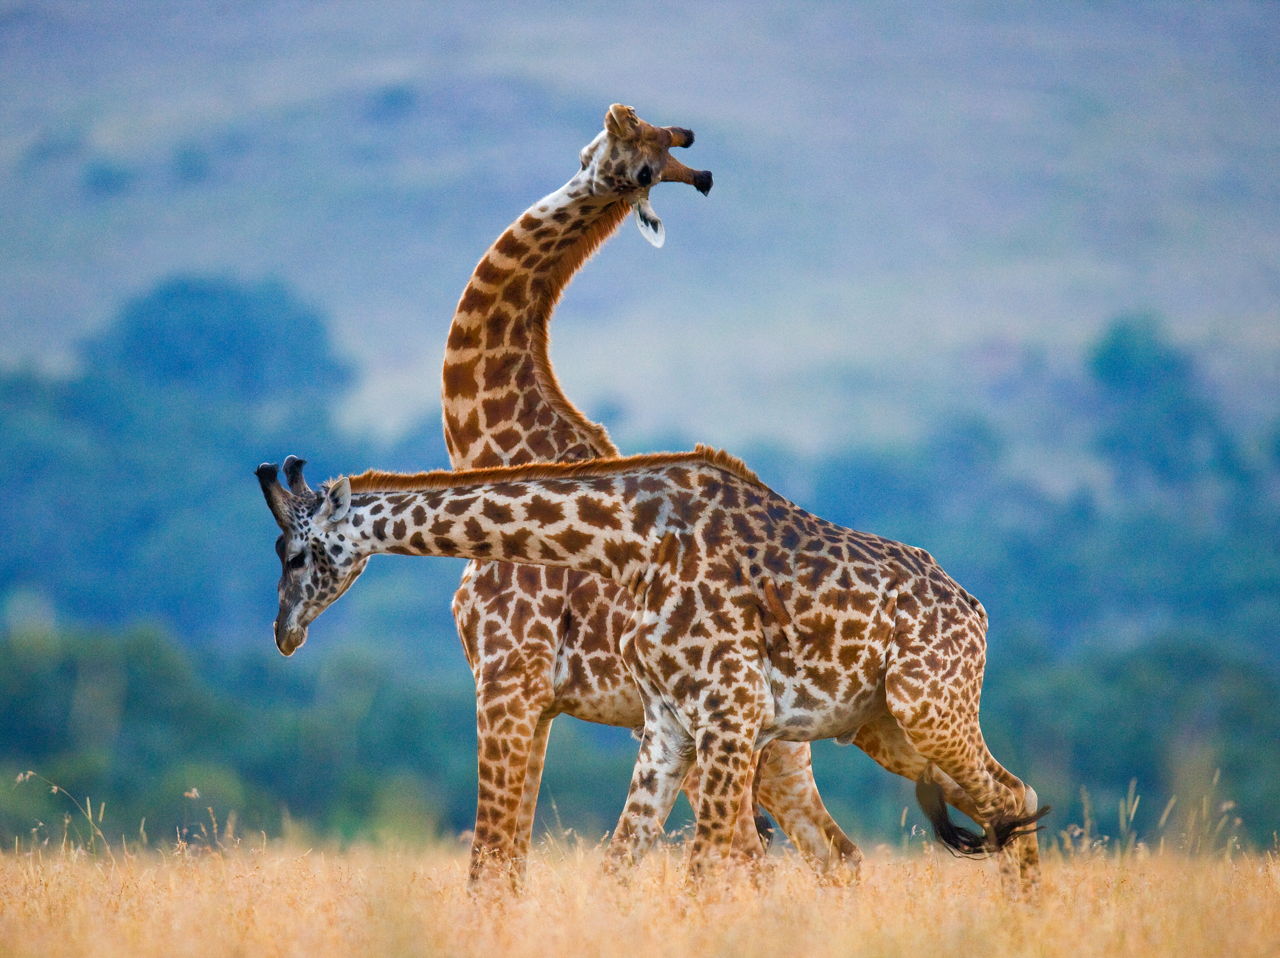 If You Can Answer 12/15 of These Questions Correctly, You’re Smarter Than the Average Person Giraffe